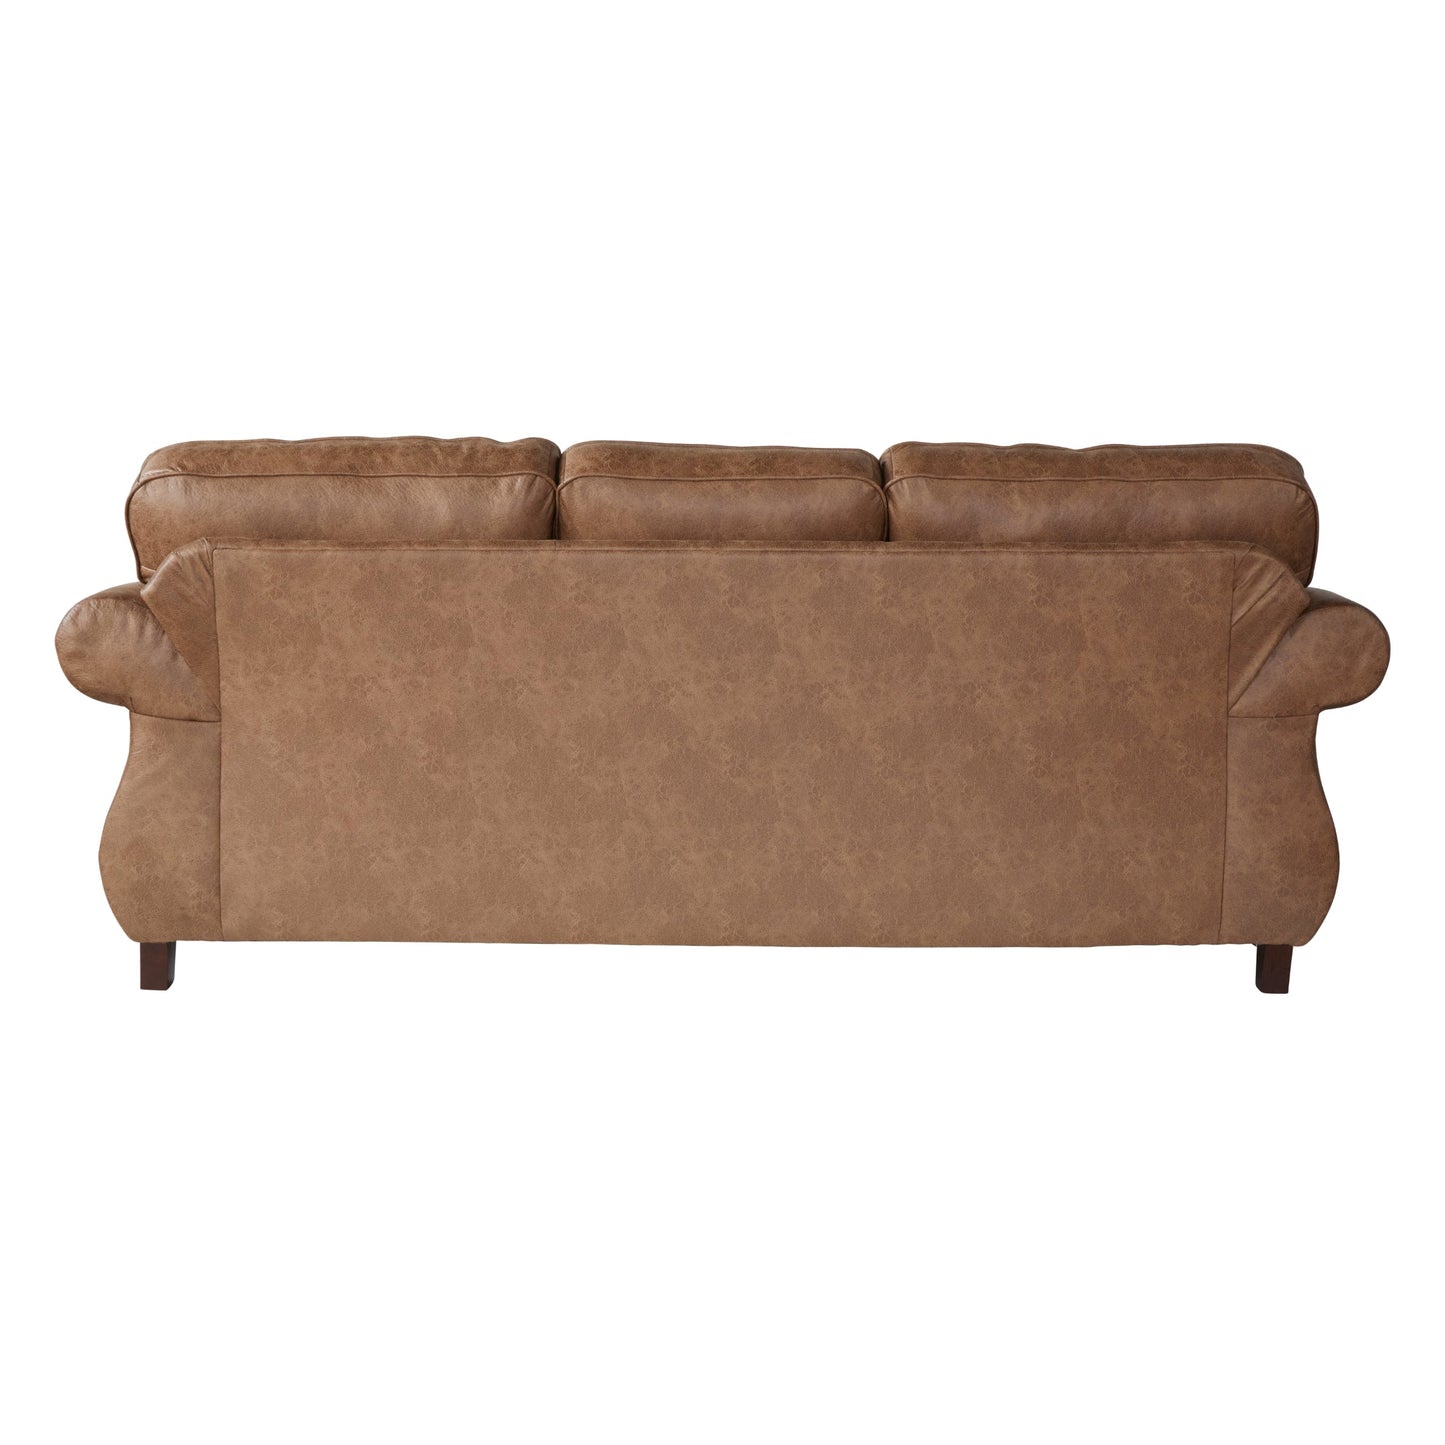 Leinster Faux Leather Sofa with Antique Bronze Nailheads in Jetson Ginger